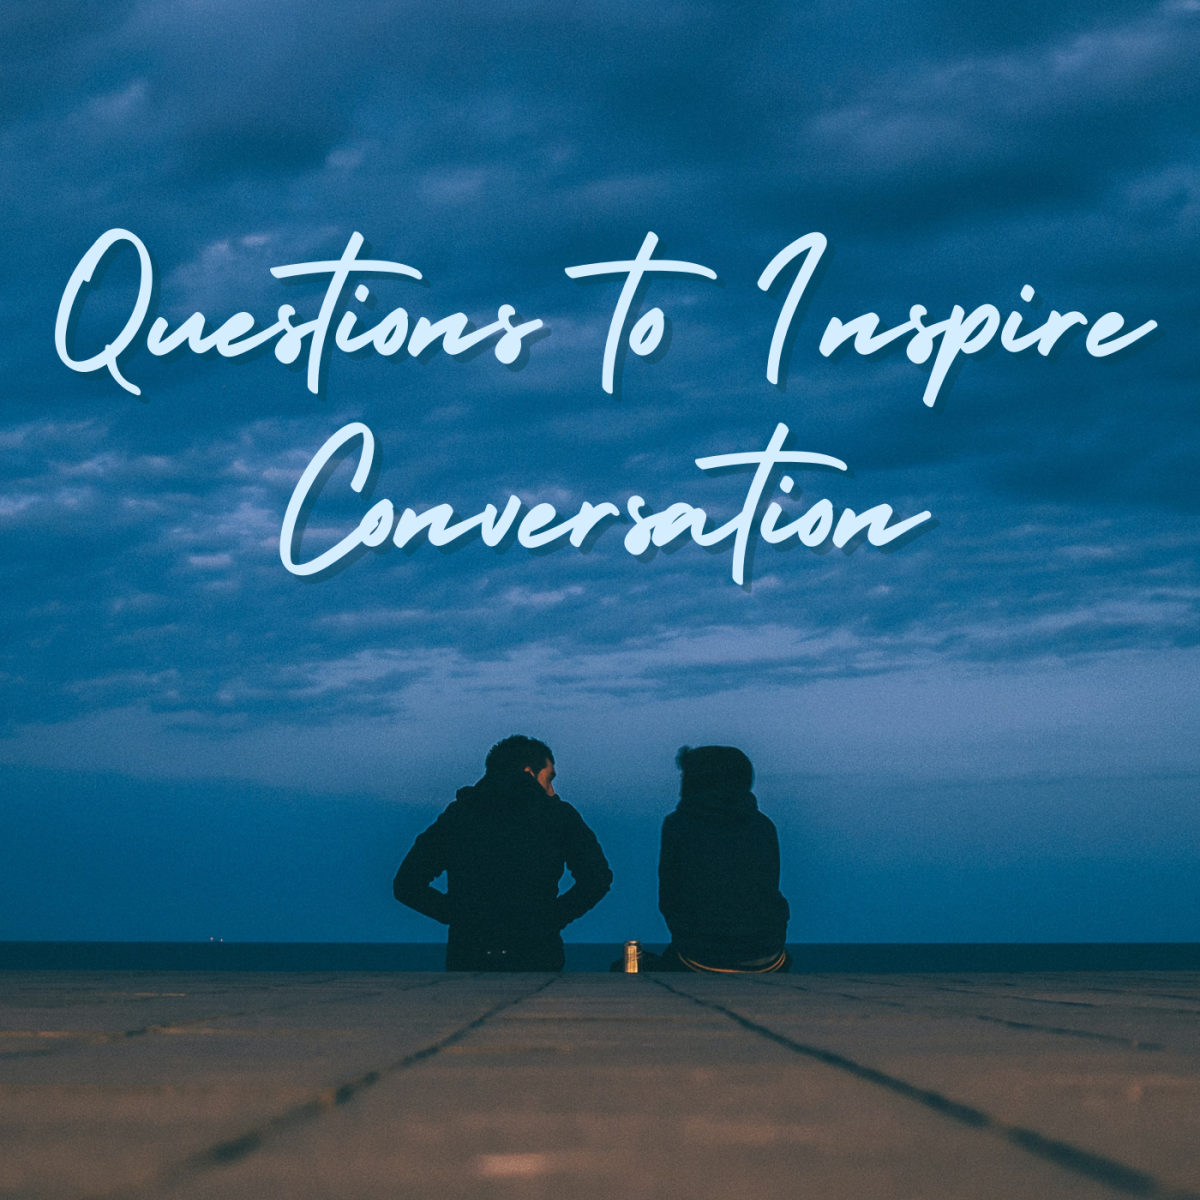 Avoid awkward pauses in conversation by being prepared with good questions to ask.